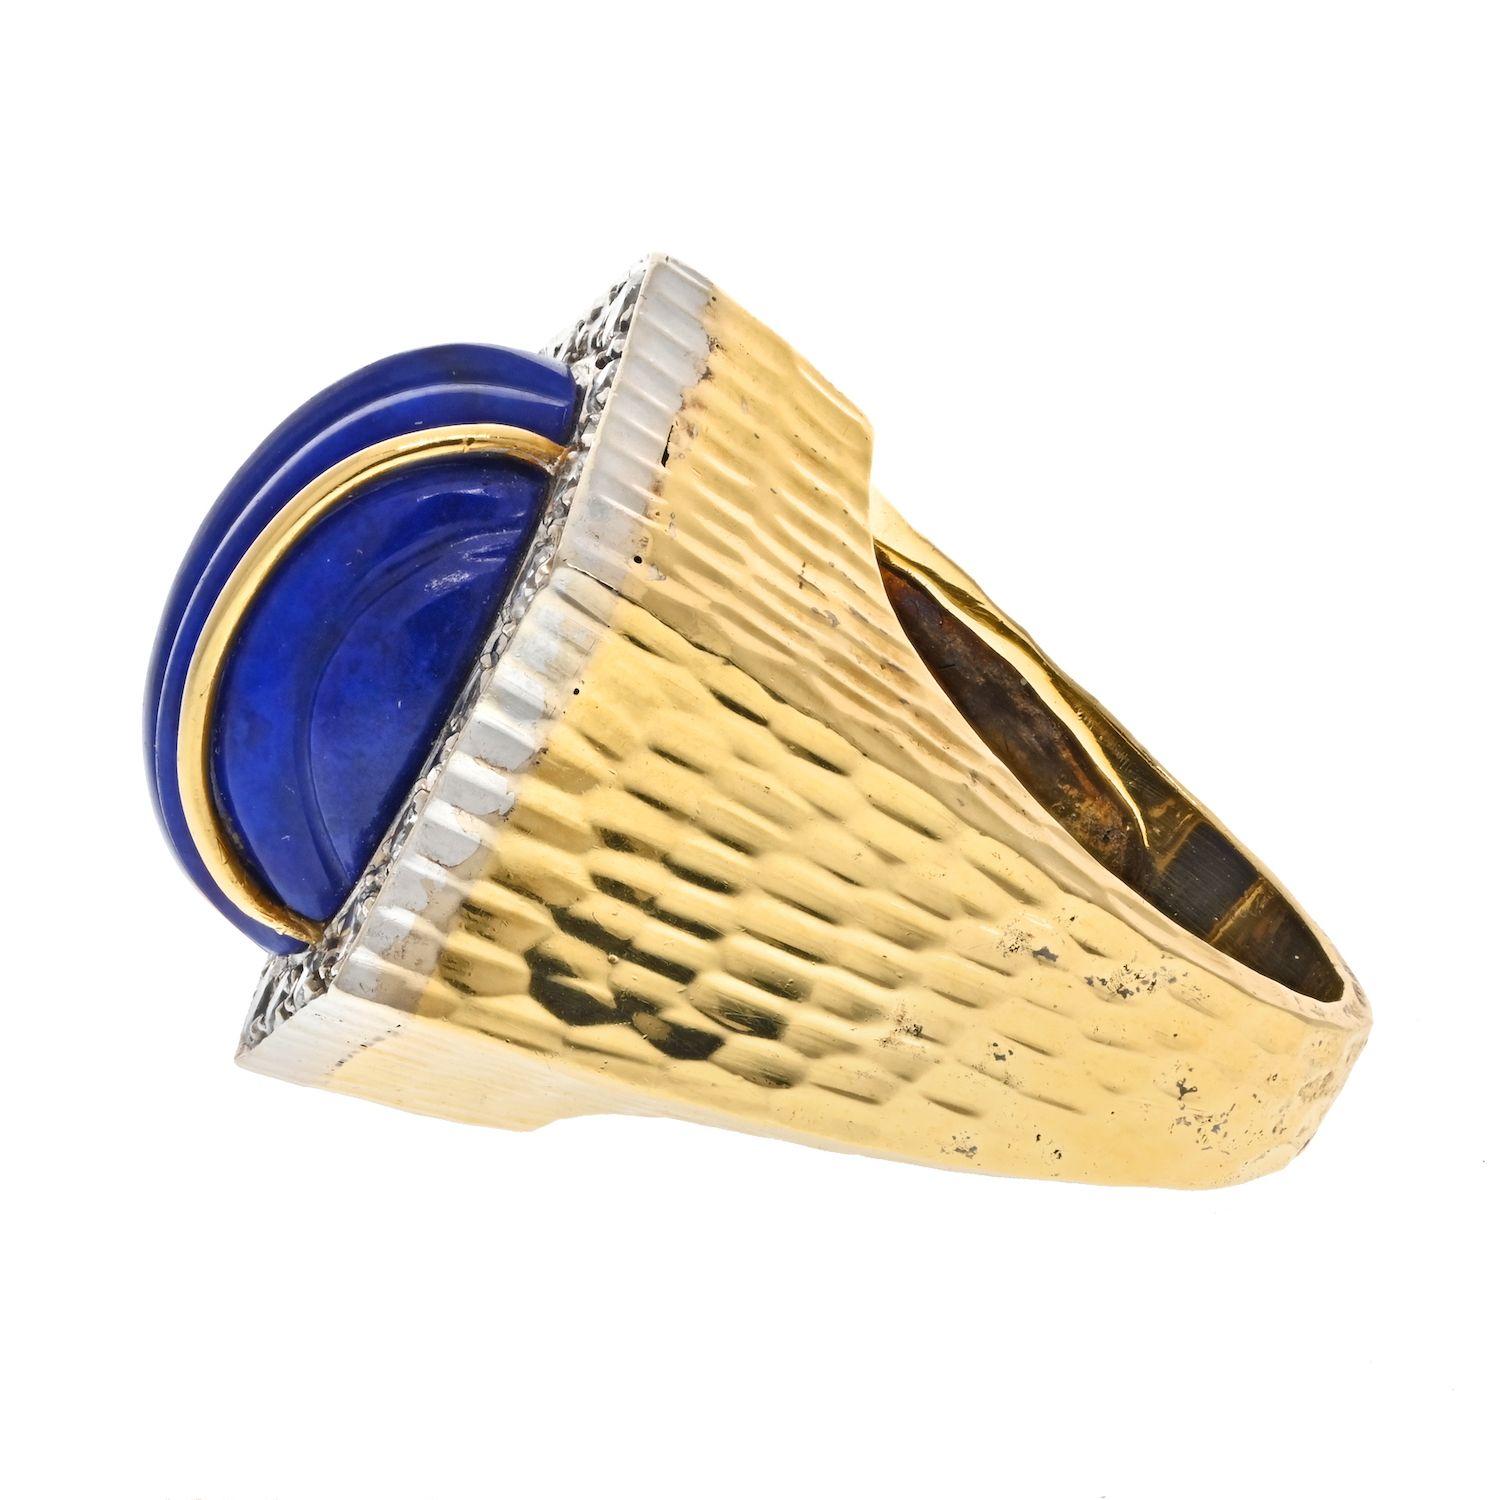 David Webb's lapis lazuli and diamond yellow gold ring is a beautiful and unique piece of jewelry. Lapis lazuli is a semi-precious stone that has been treasured since antiquity for its intense blue color. Platinum backdrop of the diamonds and yellow